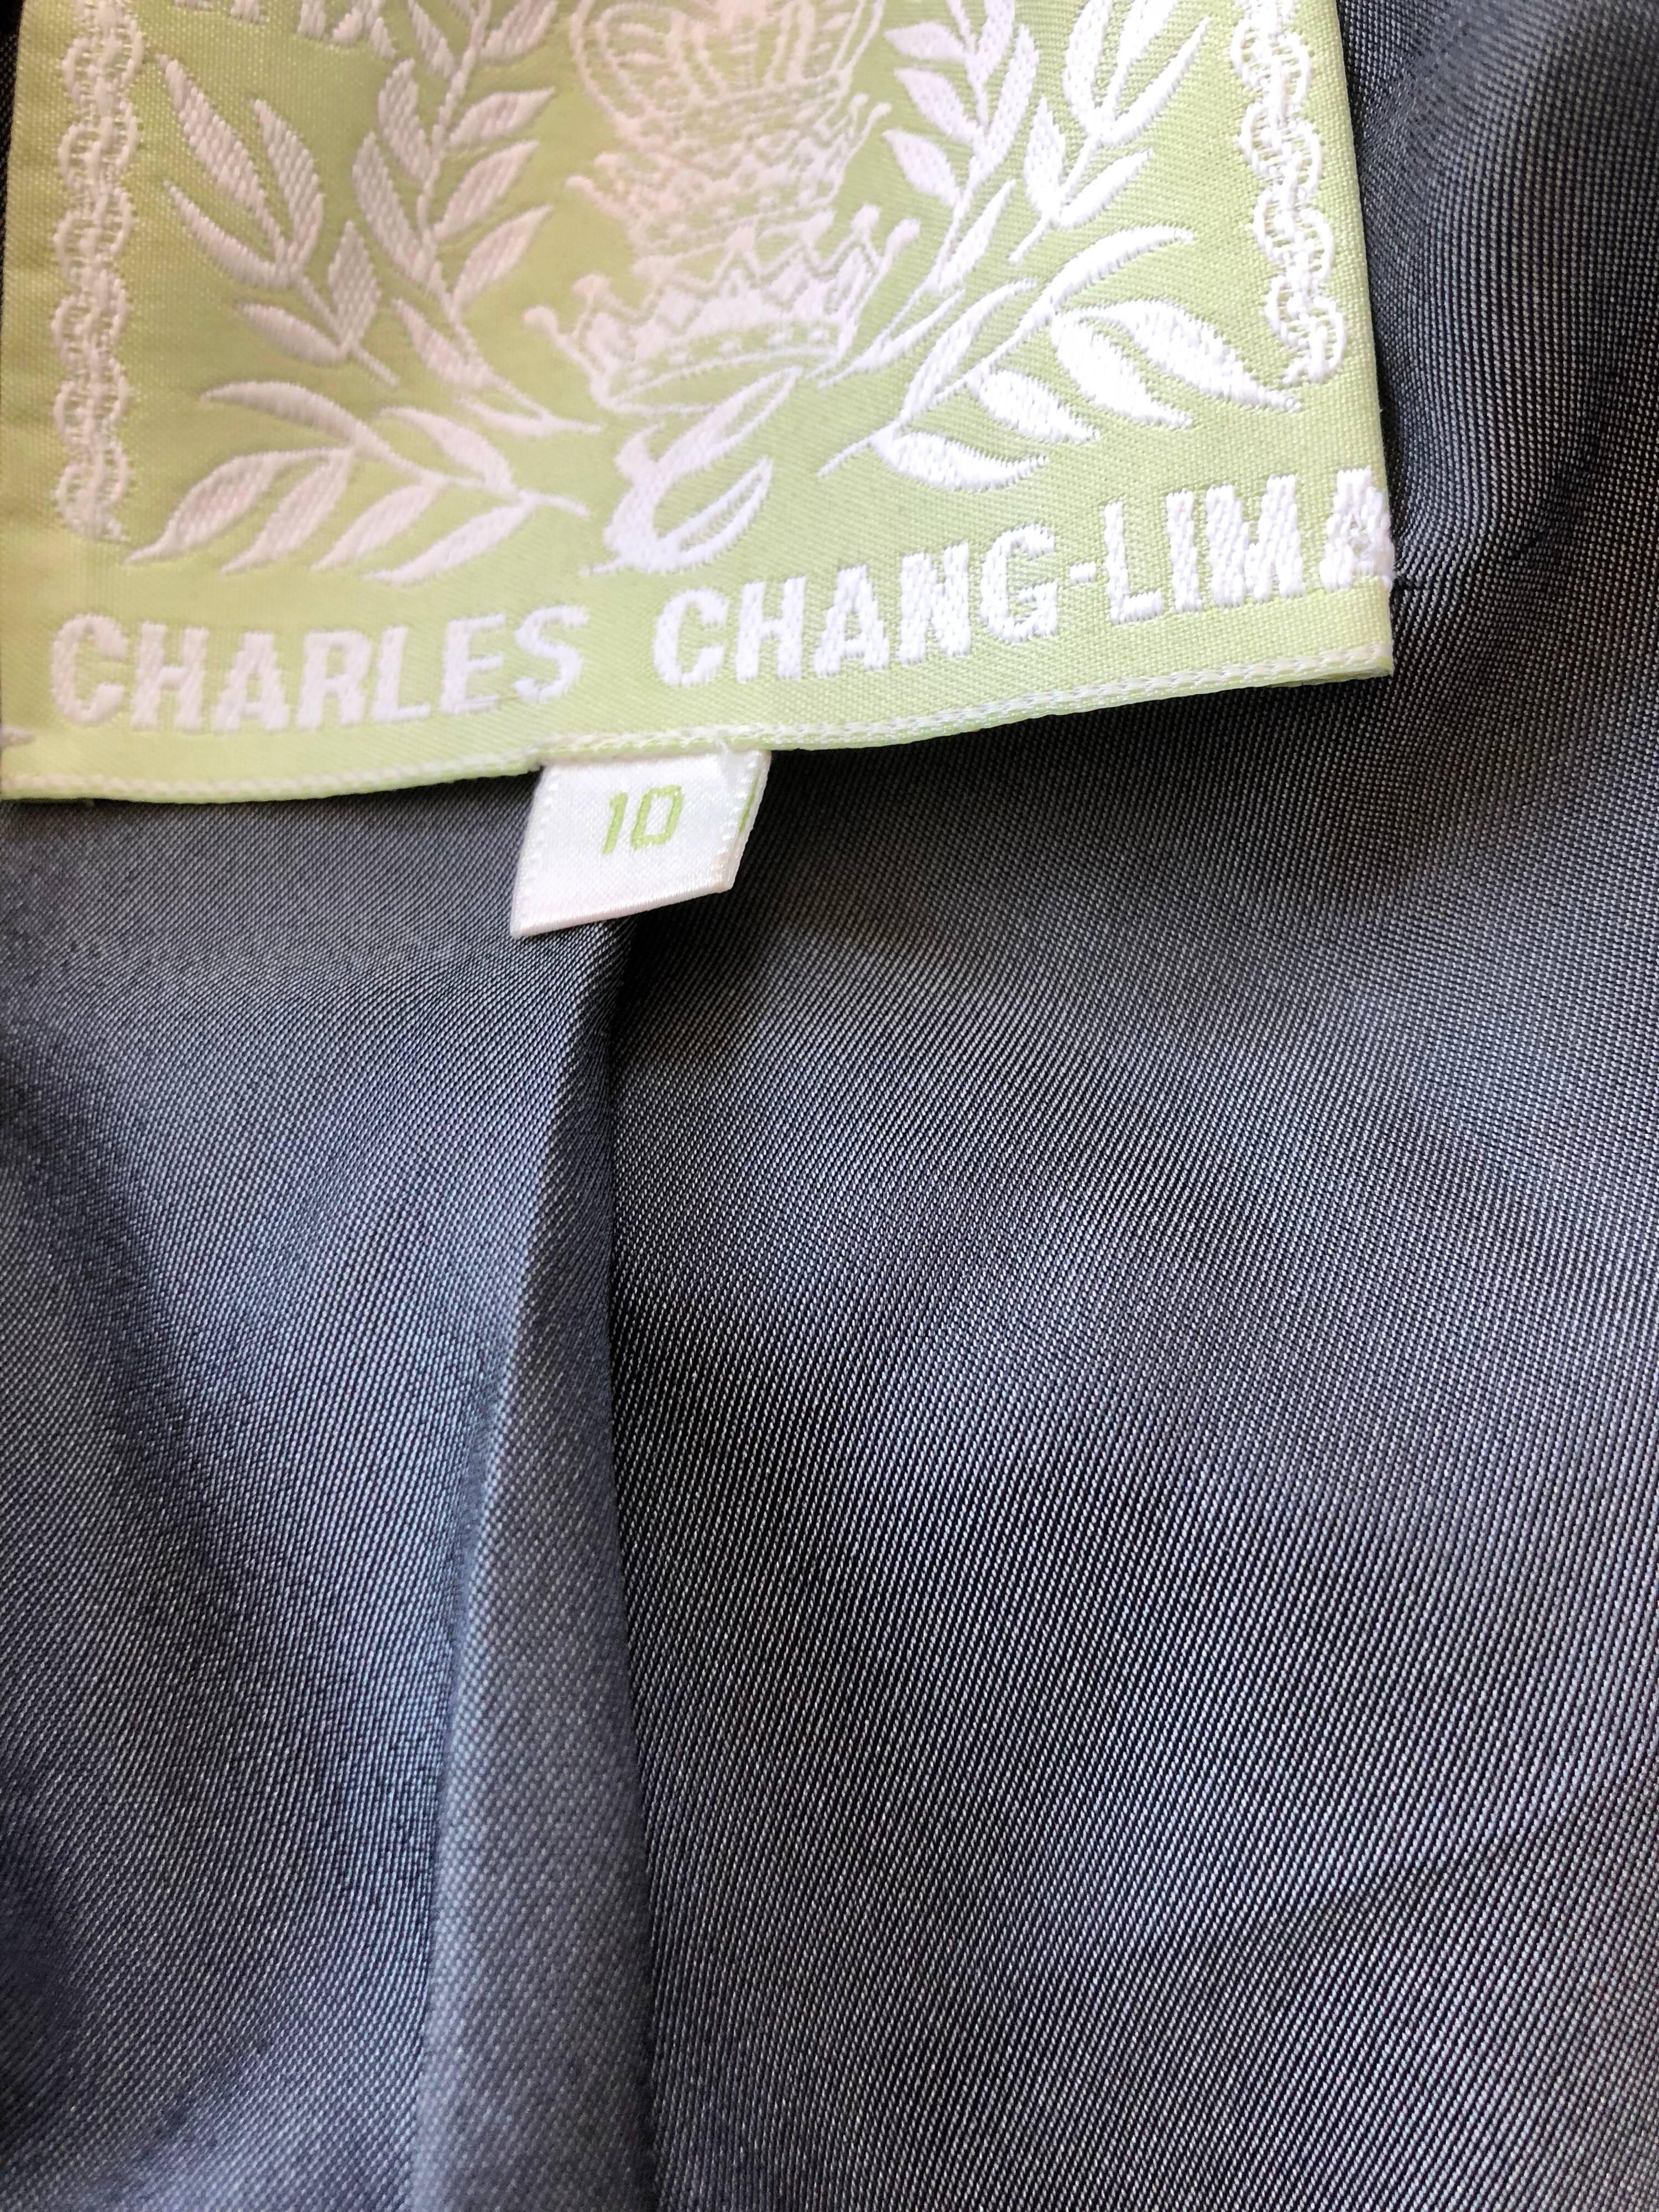 New 1990s Charles Chang Lima Size 10 Double Breasted Gray Pinstripe Wool Dress For Sale 10